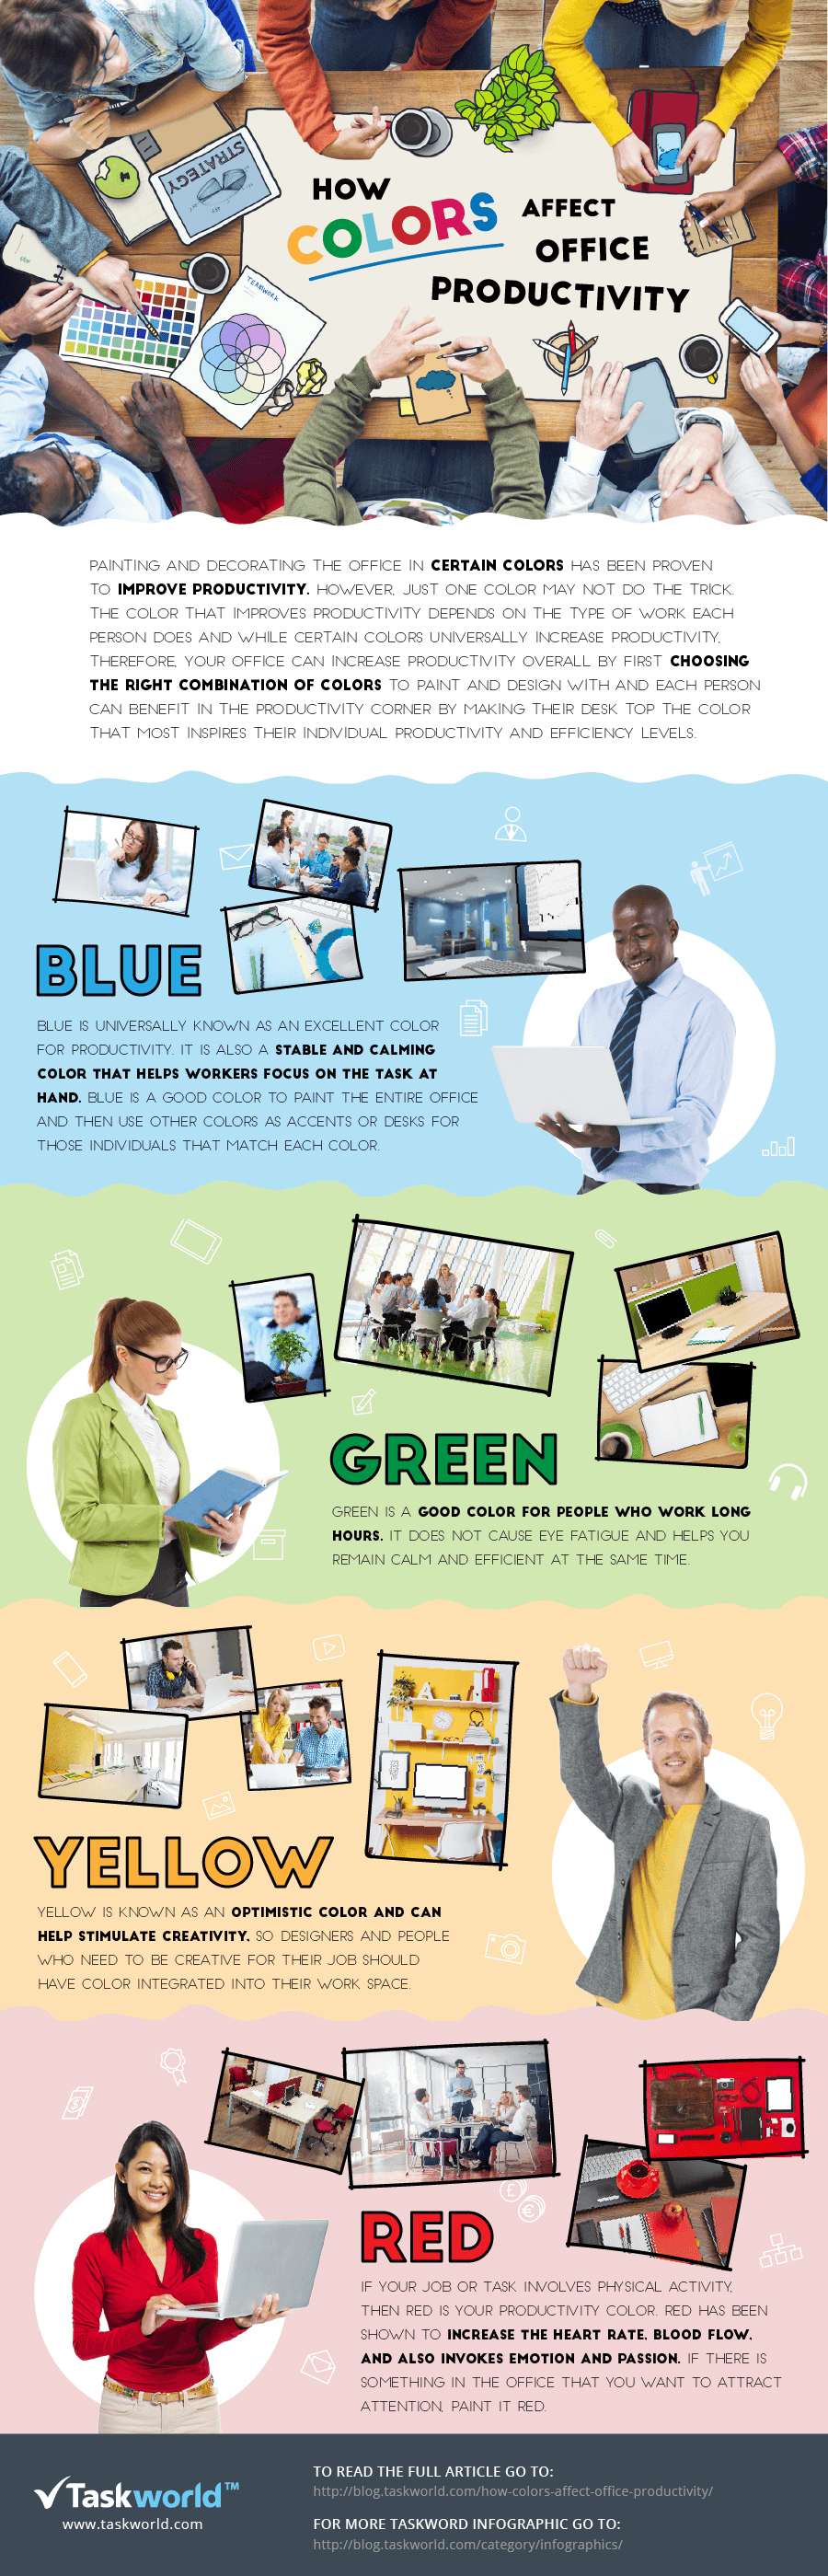 coloring the workplace infographic